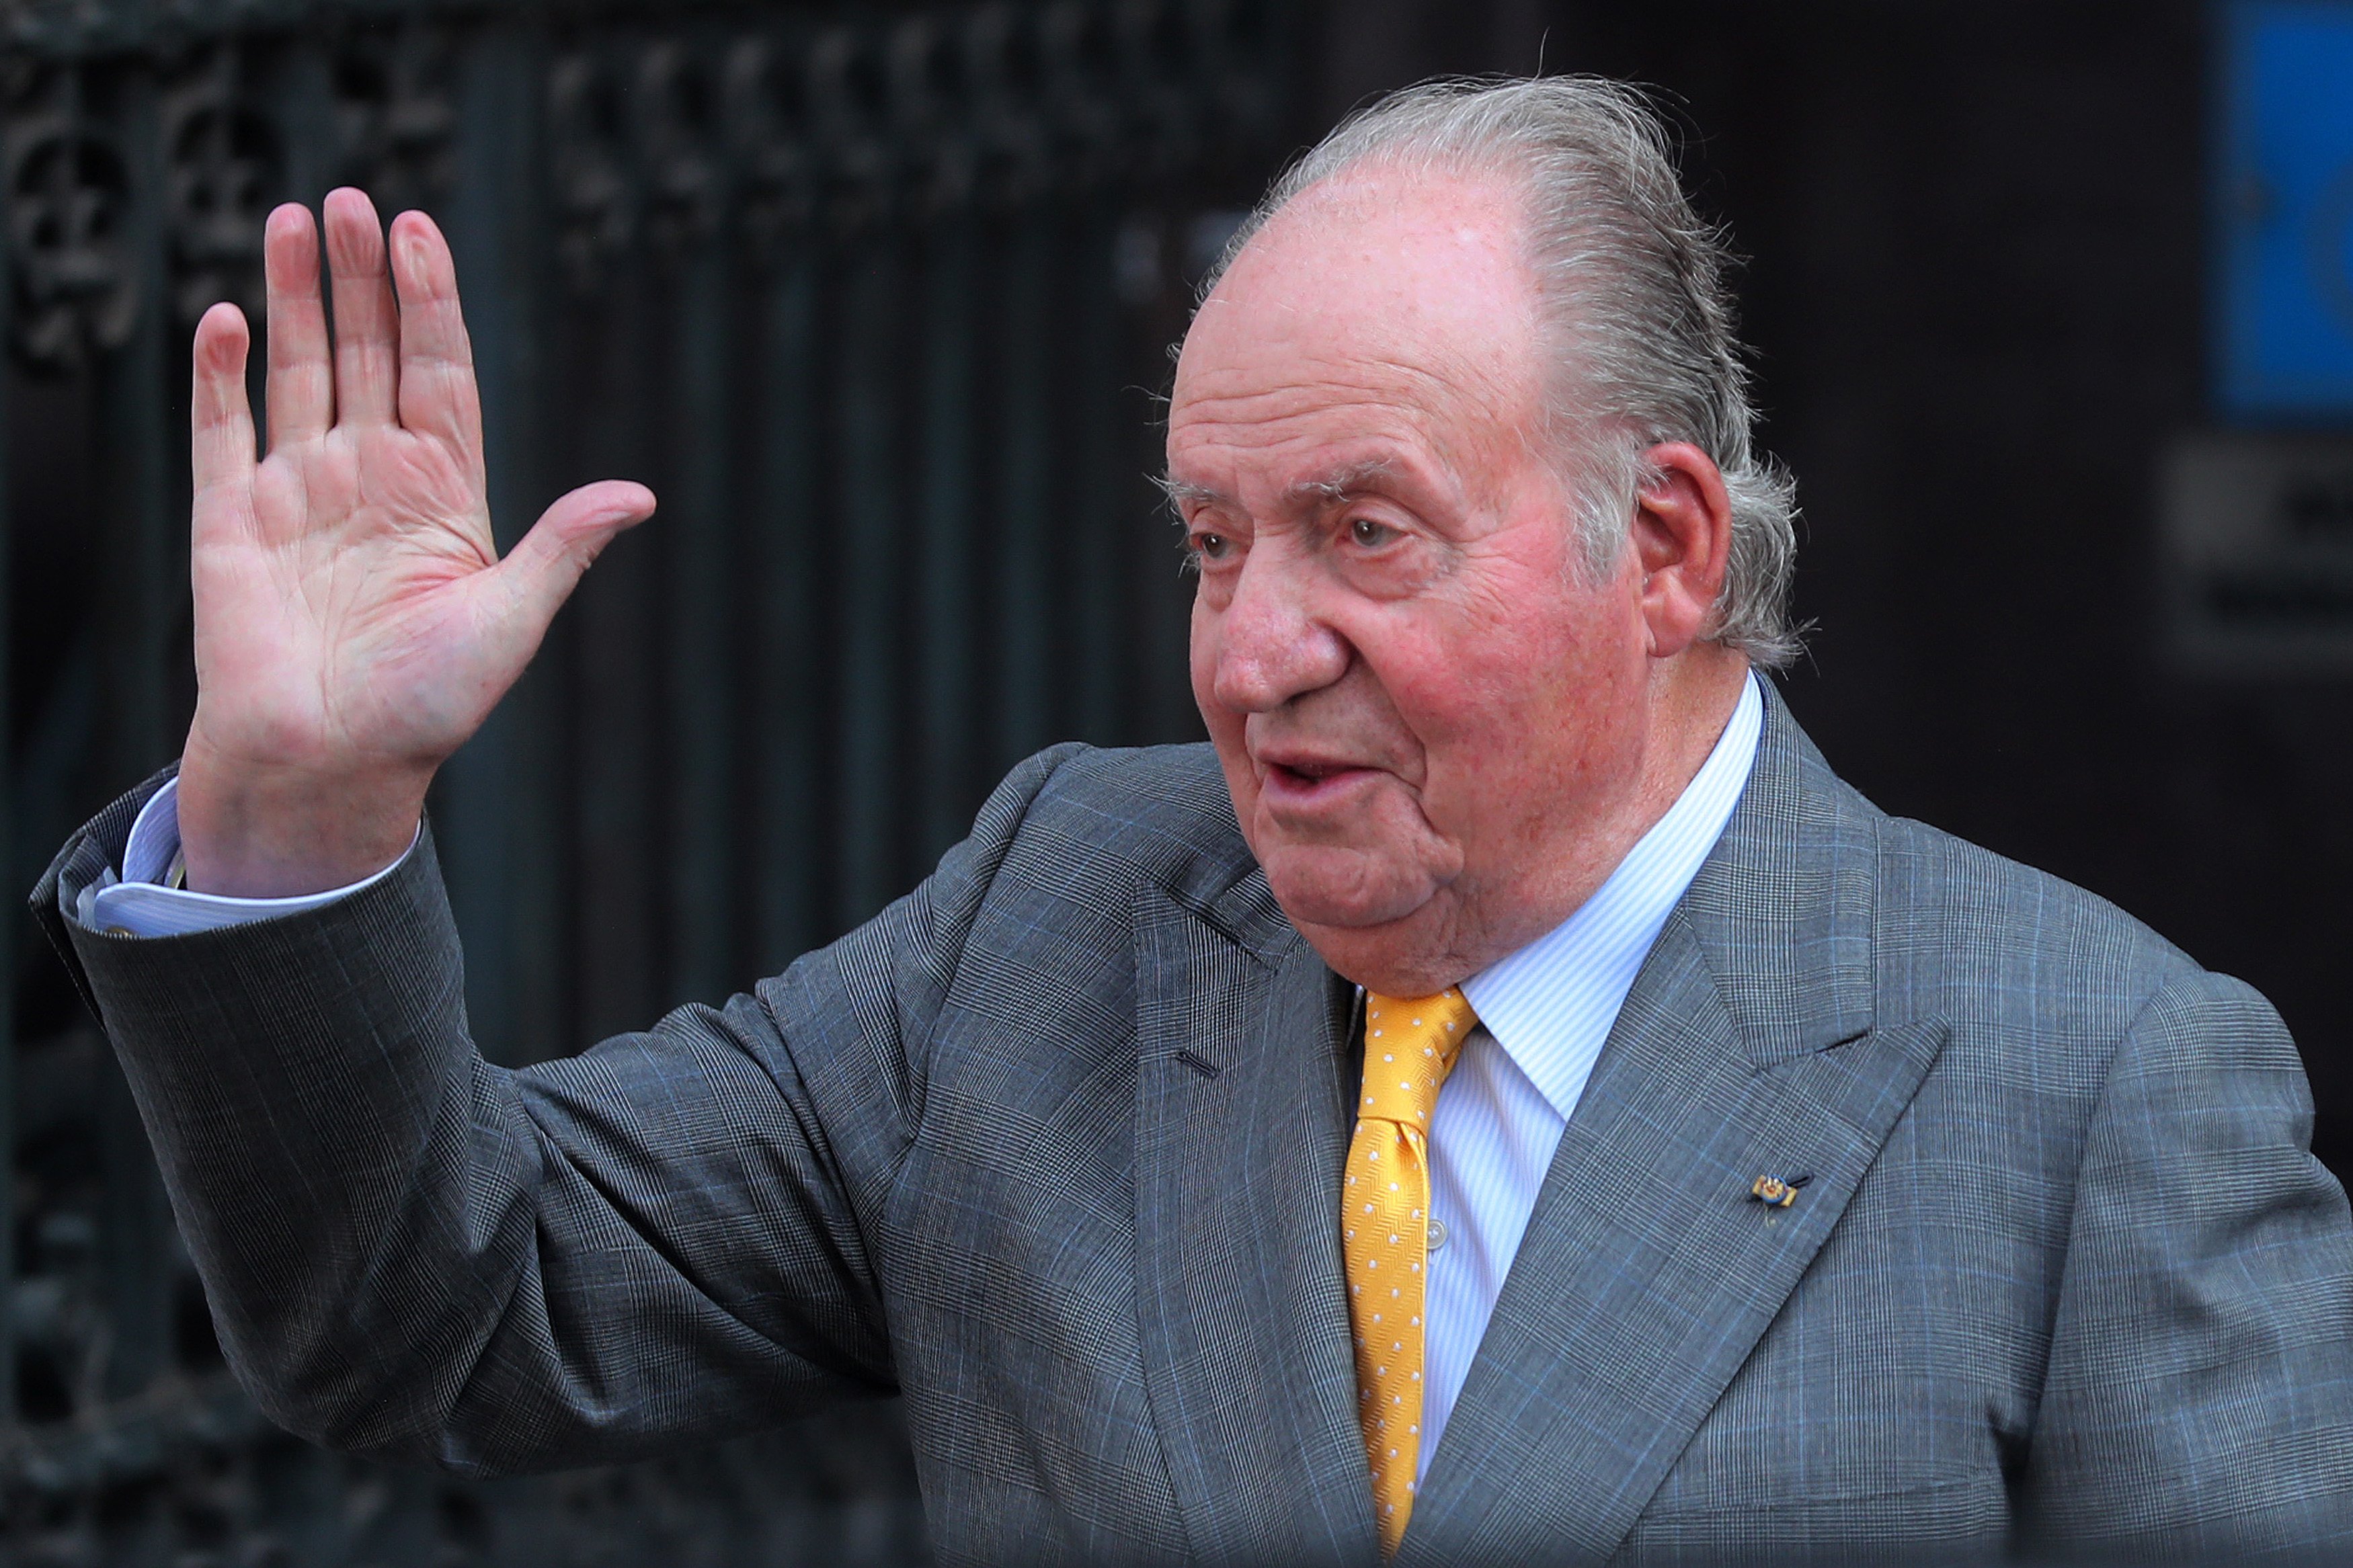 'Financial Times' article says Spain's Juan Carlos problem comes from its constitution